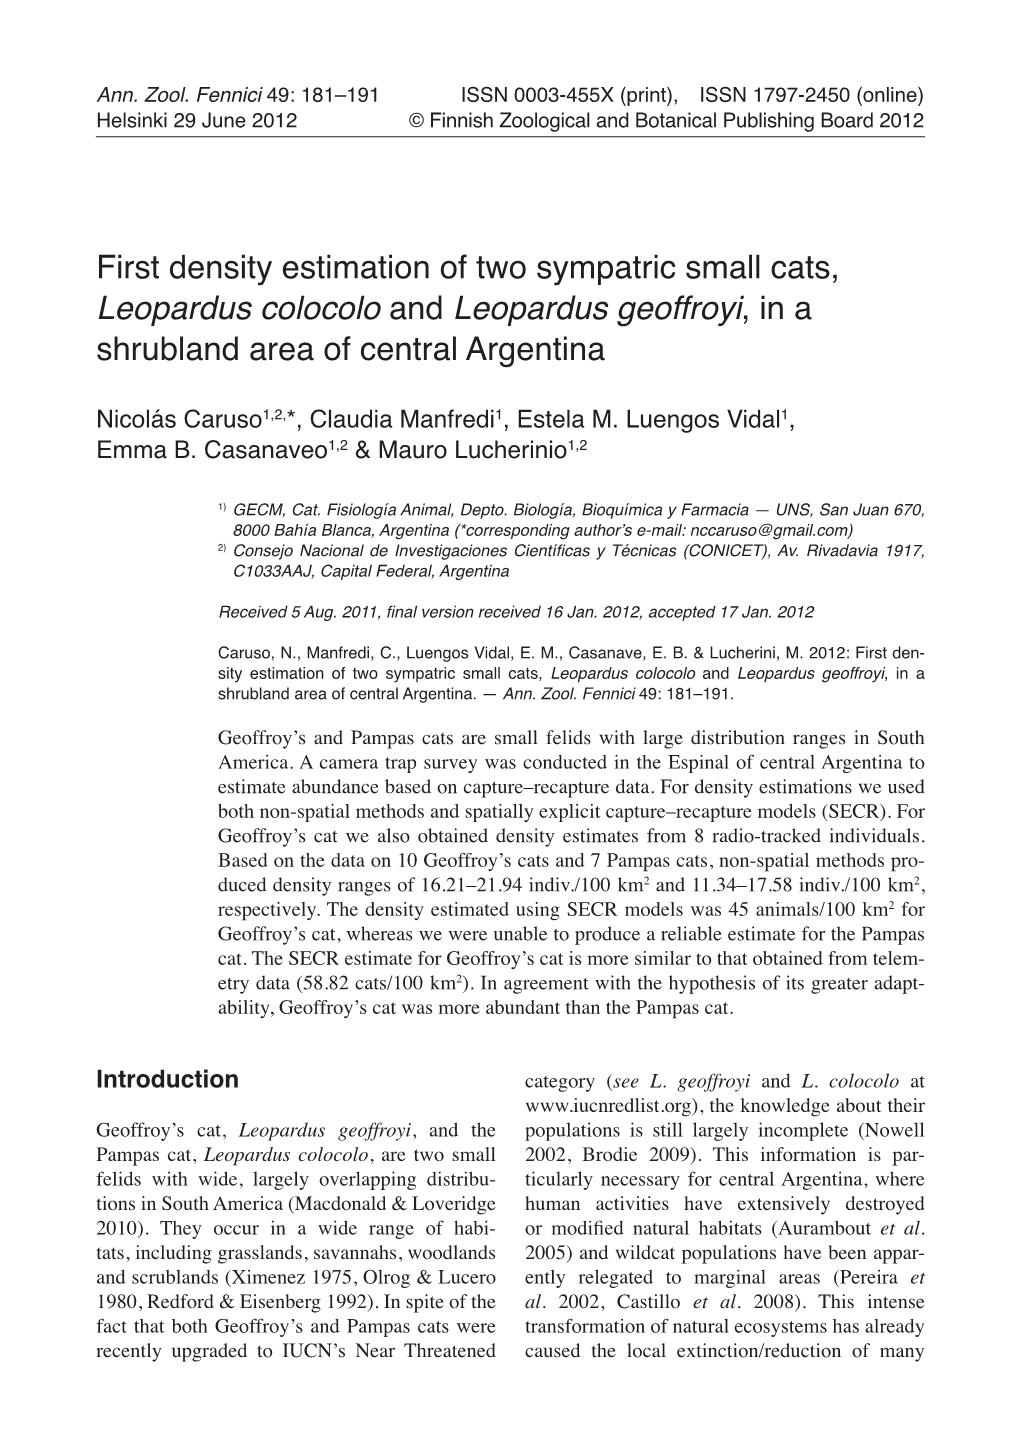 First Density Estimation of Two Sympatric Small Cats, Leopardus Colocolo and Leopardus Geoffroyi, in a Shrubland Area of Central Argentina